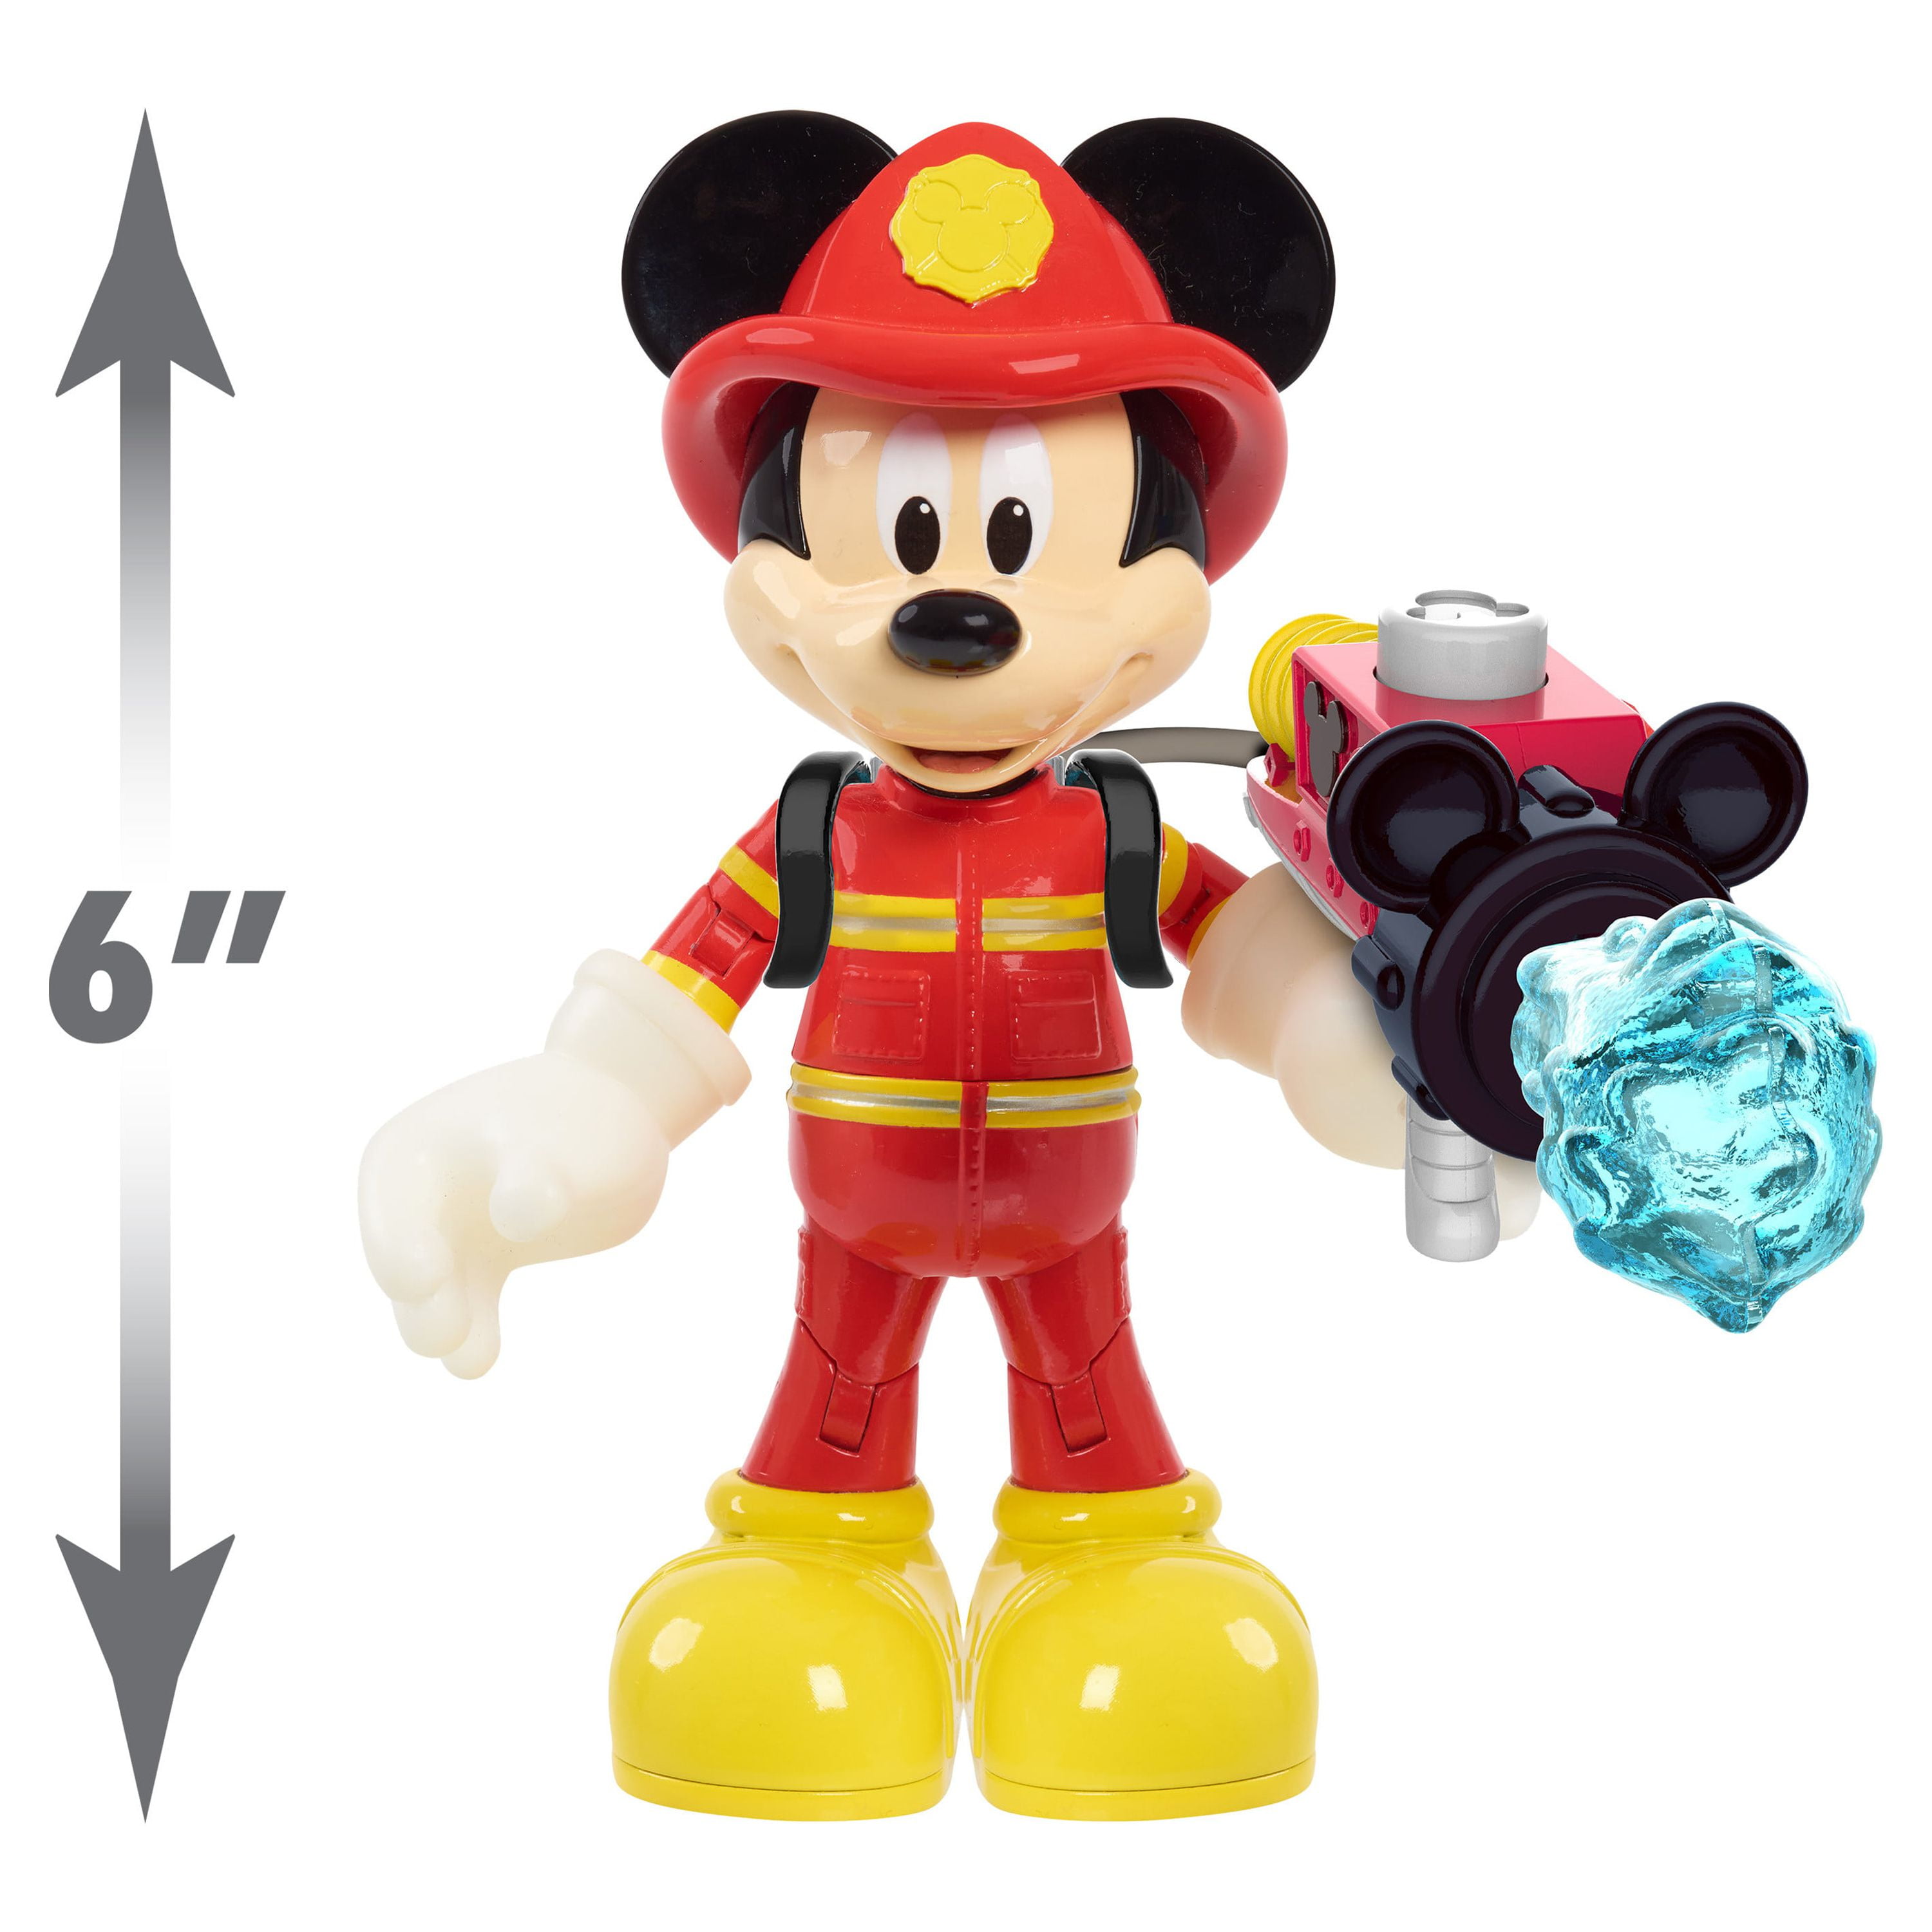 Disney Junior Fire Rescue Mickey Mouse Articulated 6-inch Figure and  Accessories, Officially Licensed Kids Toys for Ages 3 Up, Gifts and Presents